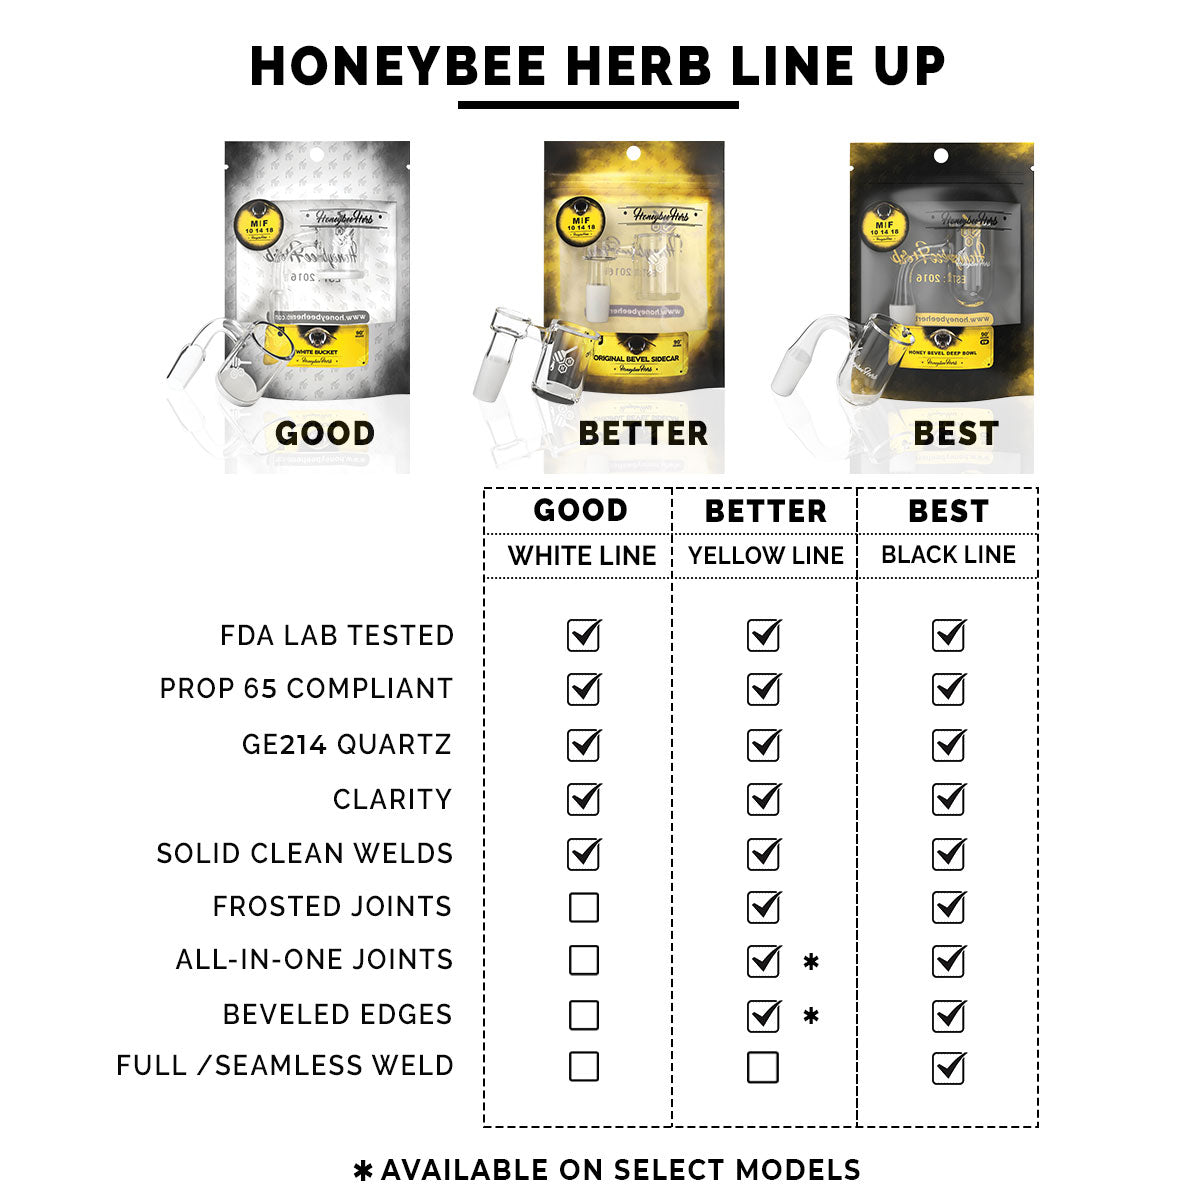 Honeybee Herb quartz banger lineup chart showing quality levels from good to best